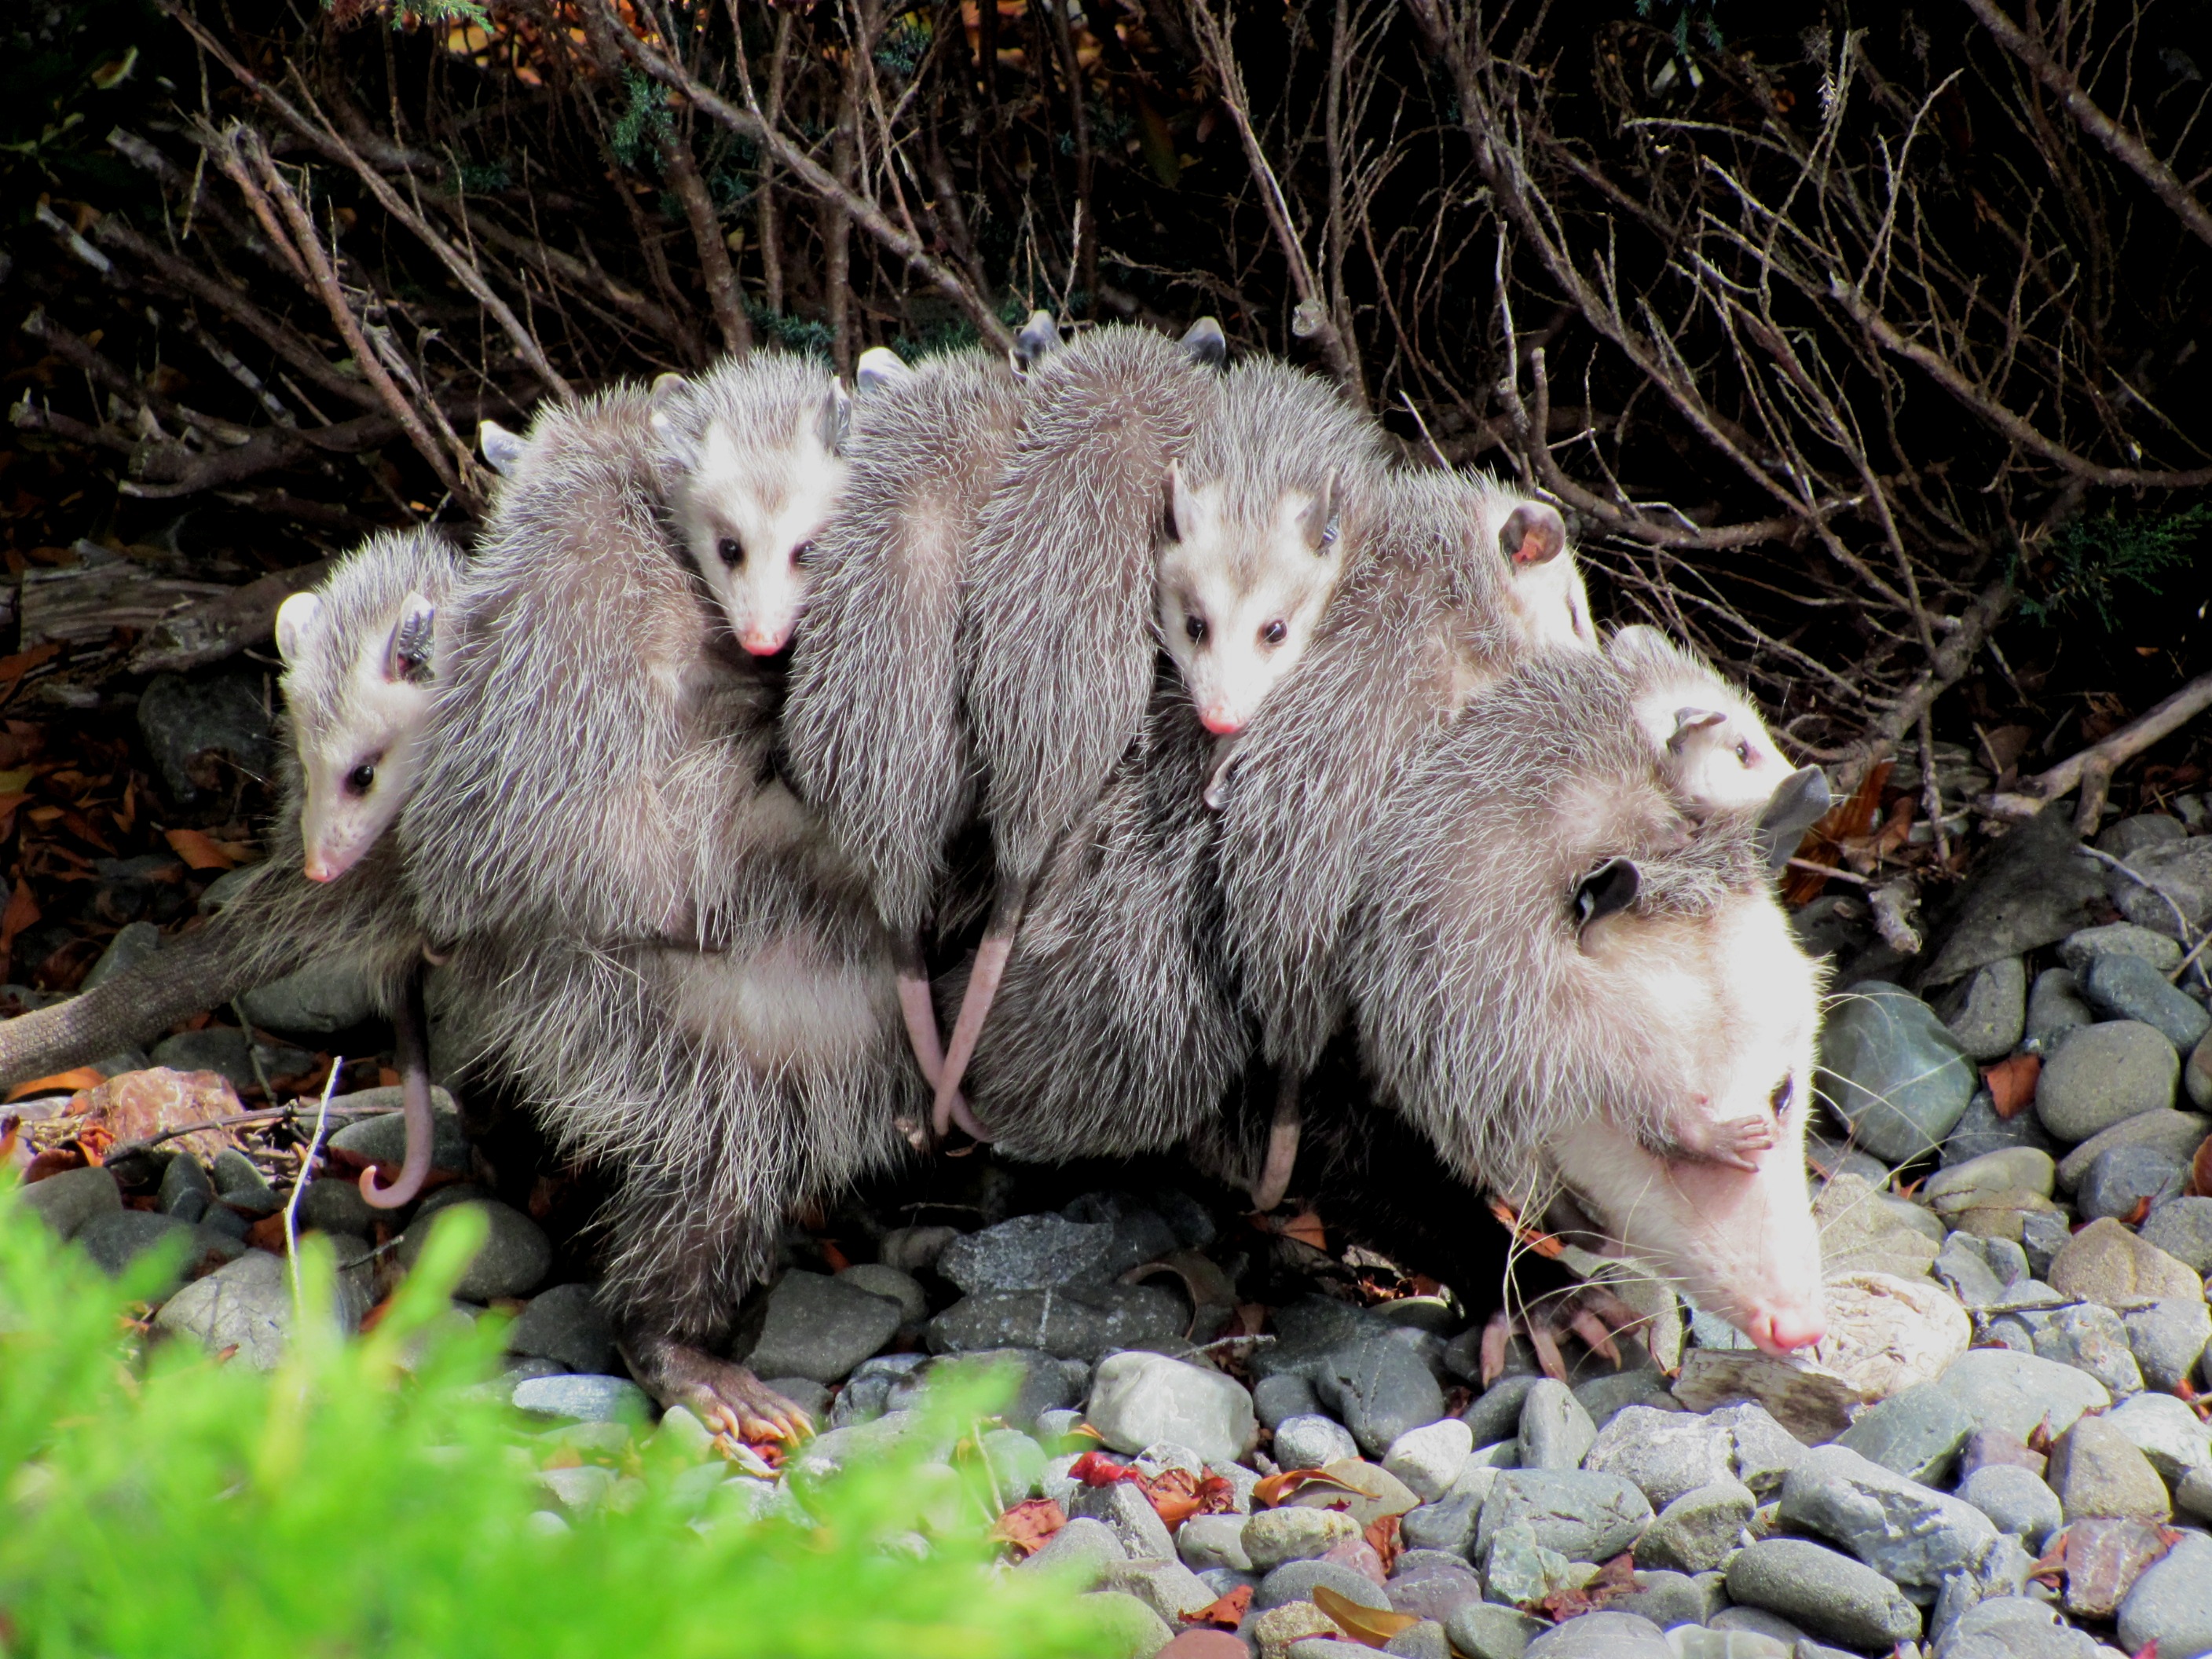 How many babies do opossums have?